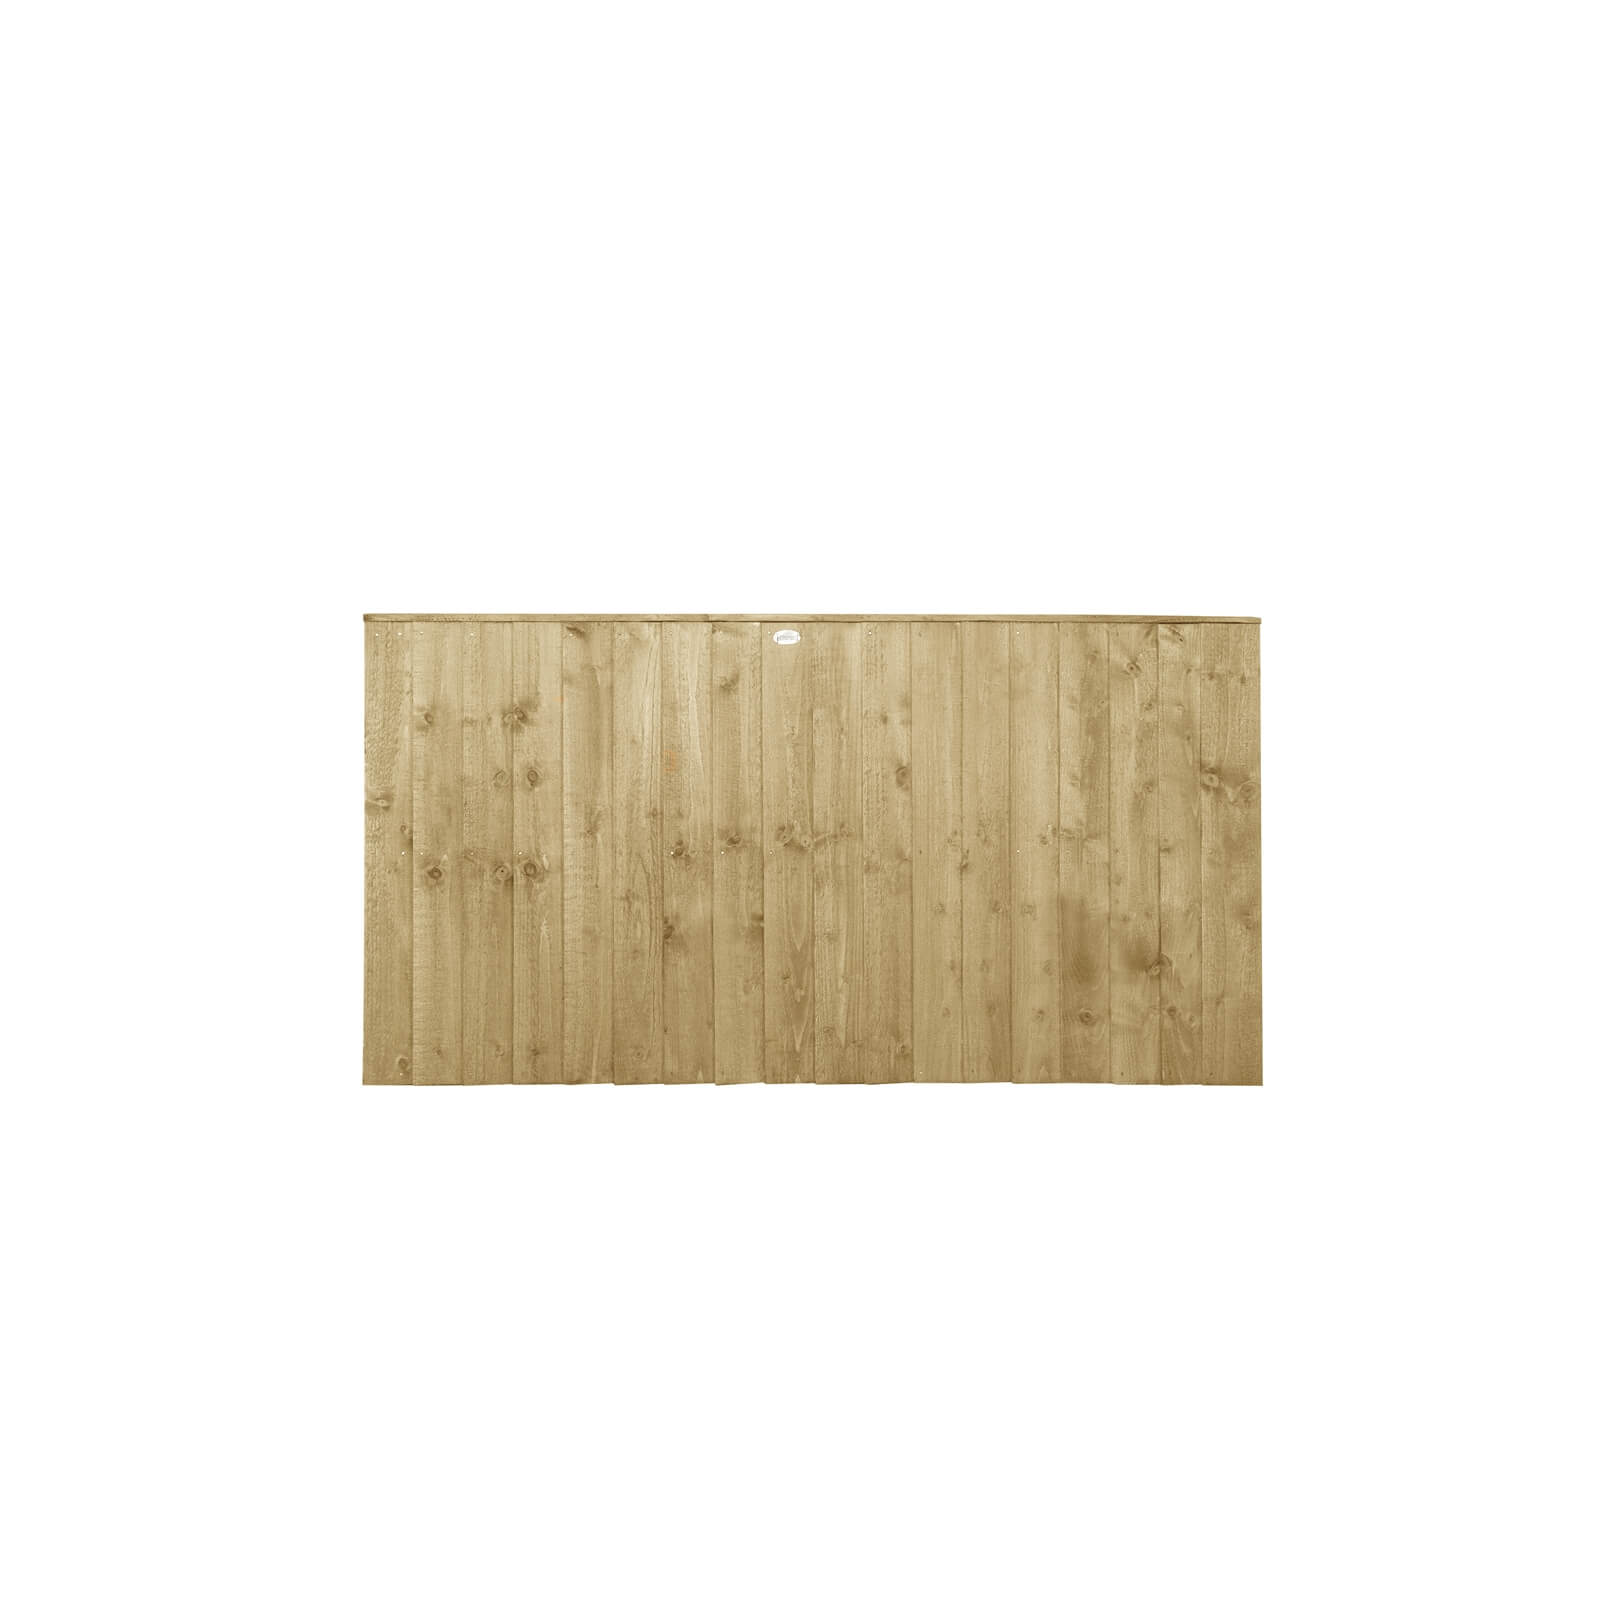 6ft x 3ft (1.83m x 0.93m) Pressure Treated Featheredge Fence Panel - Pack of 3